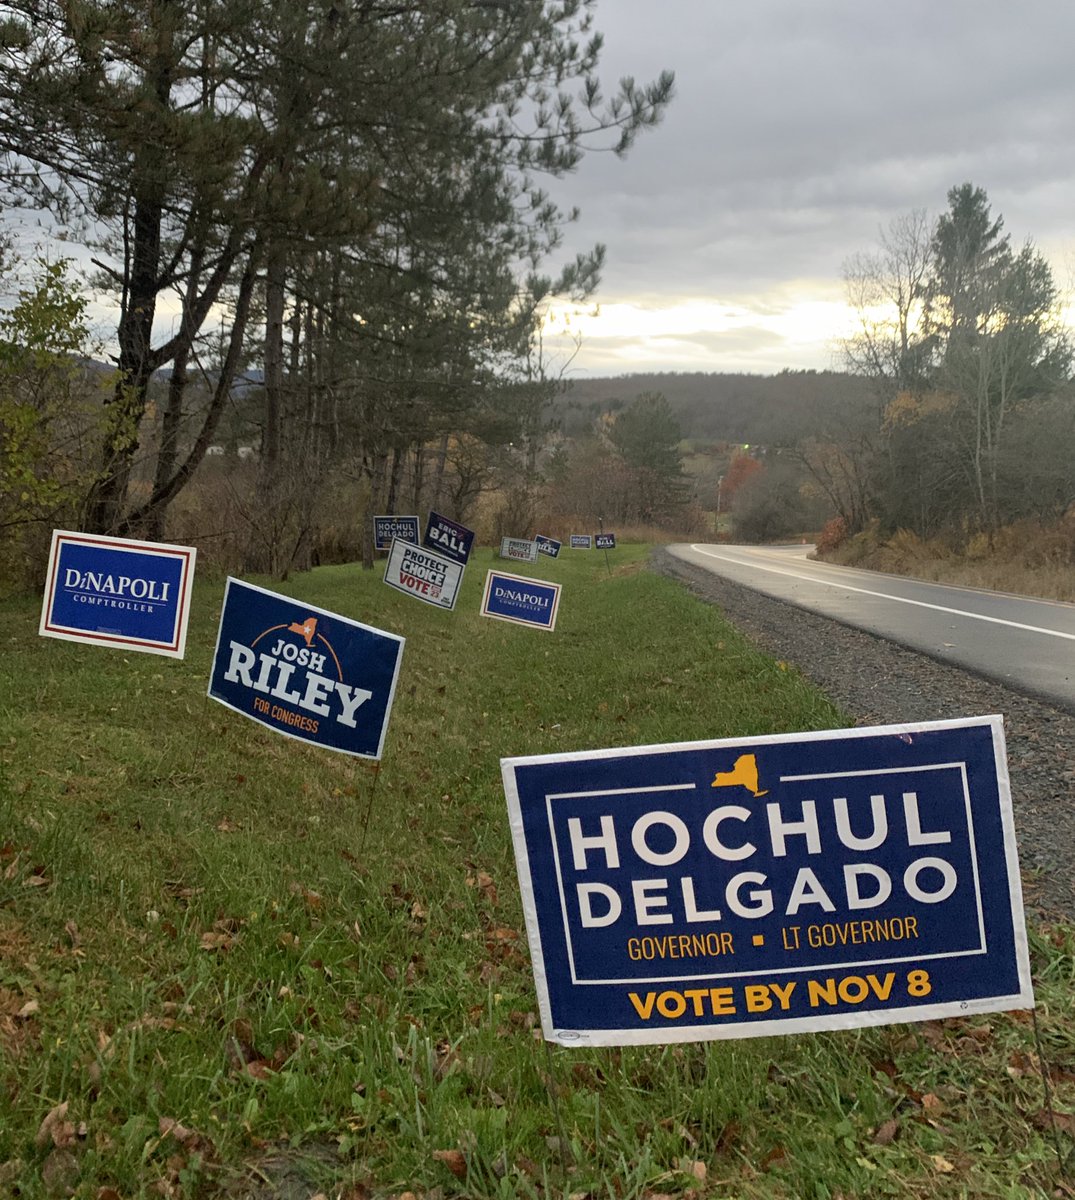 Leaving no stone unturned in rural NY. 🧑🏼‍🌾 

Delaware County must know what ticket is working for their best interest! 

Row A, baby! 

@KathyHochul
@DelgadoforNY 
@TomDiNapoli 
@JoshuaUE99 
@ericball_nysd51 

(& an old @PatRyanUC sign b/c of OUTSTANDING pro-choice messaging!)